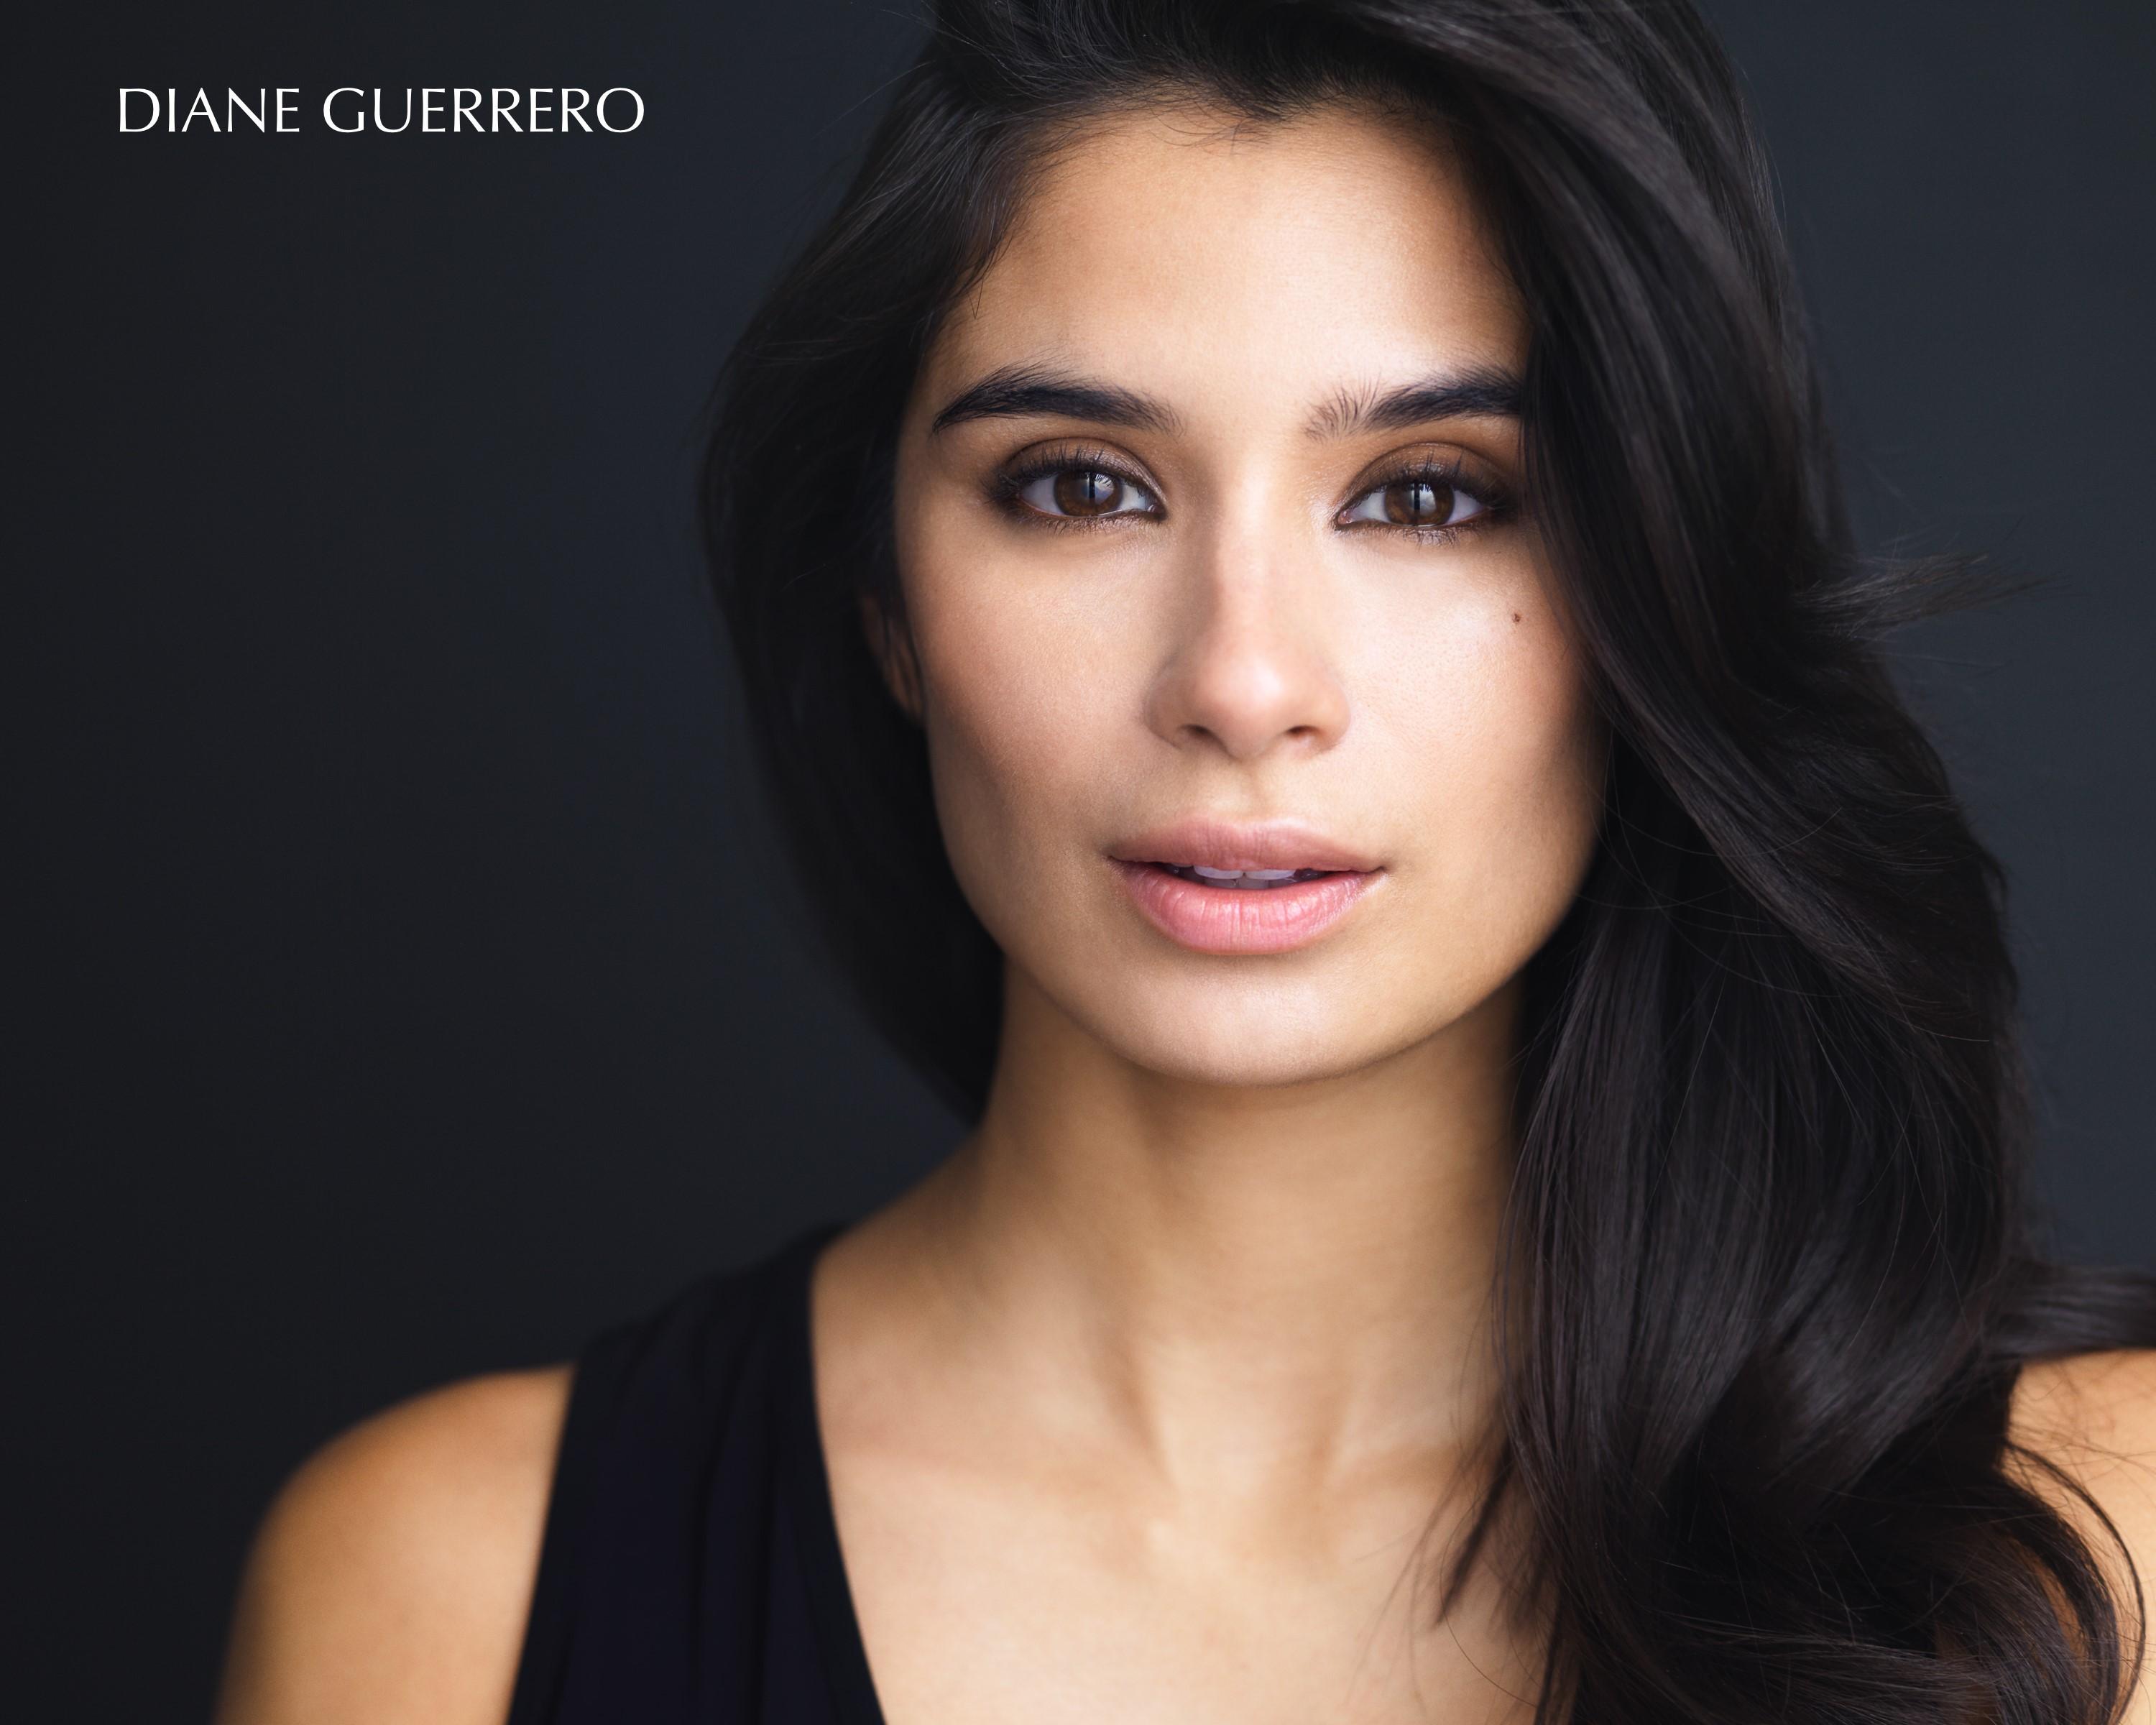 Diane Guerrero To Star In CBS Drama From 'Jane the Virgin